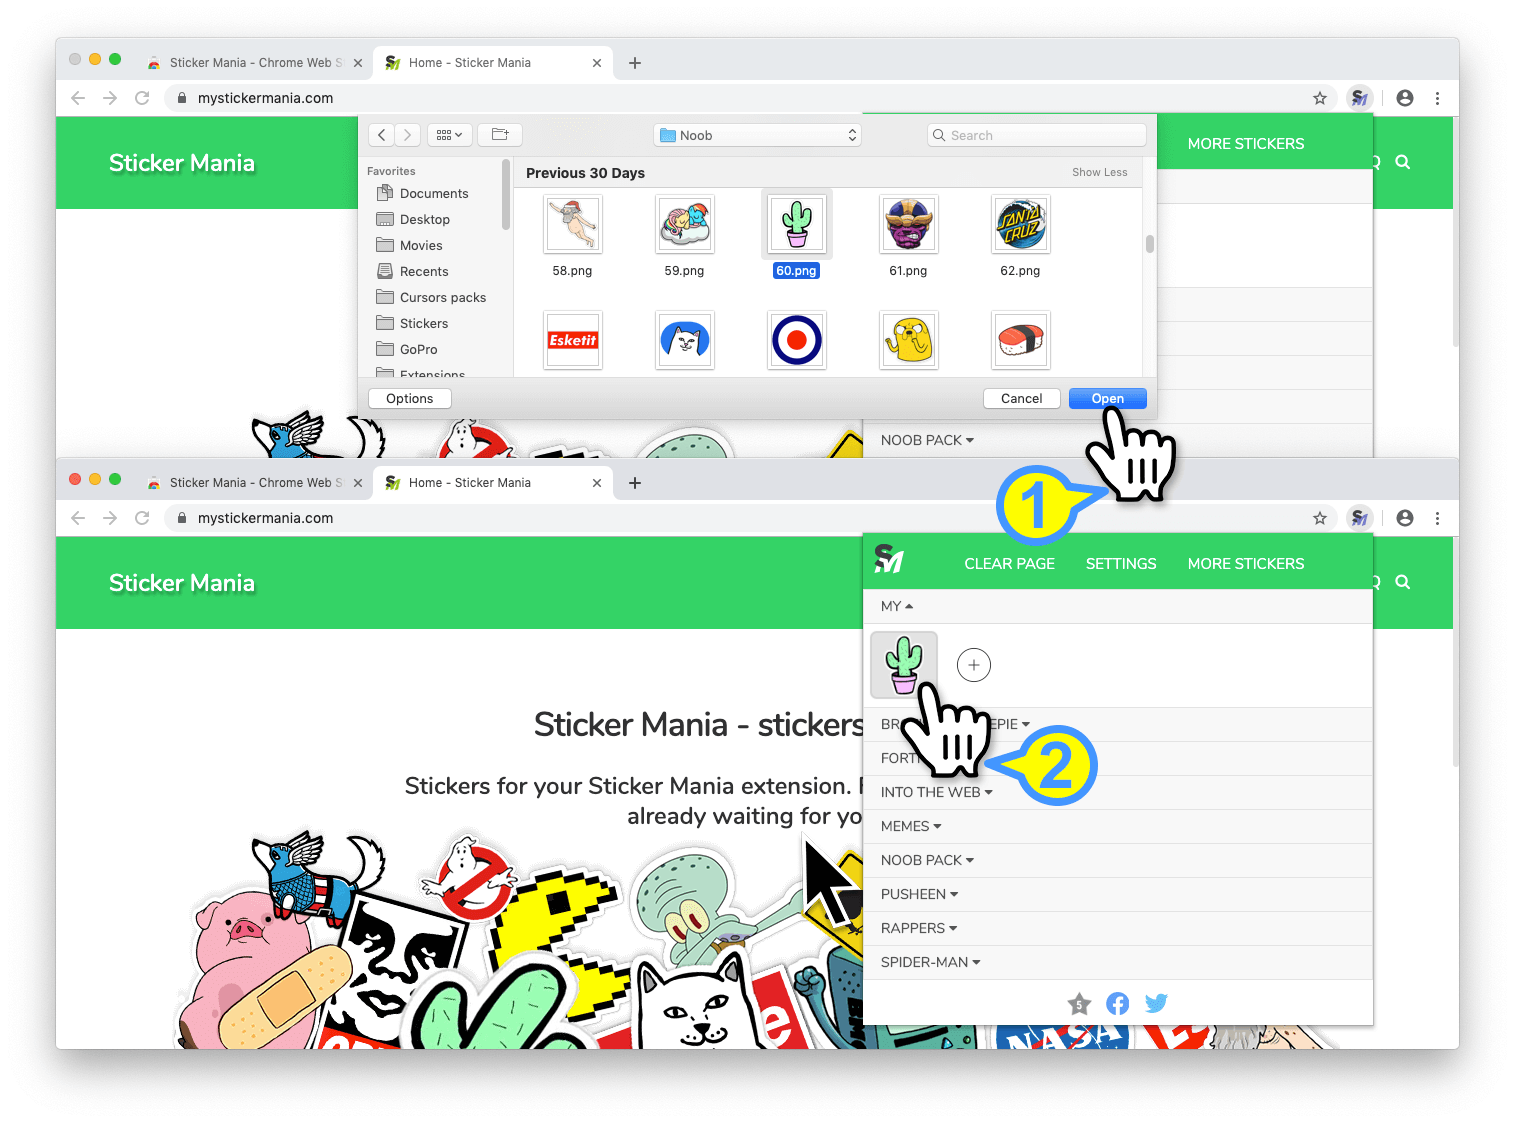 Using the add your own sticker tool